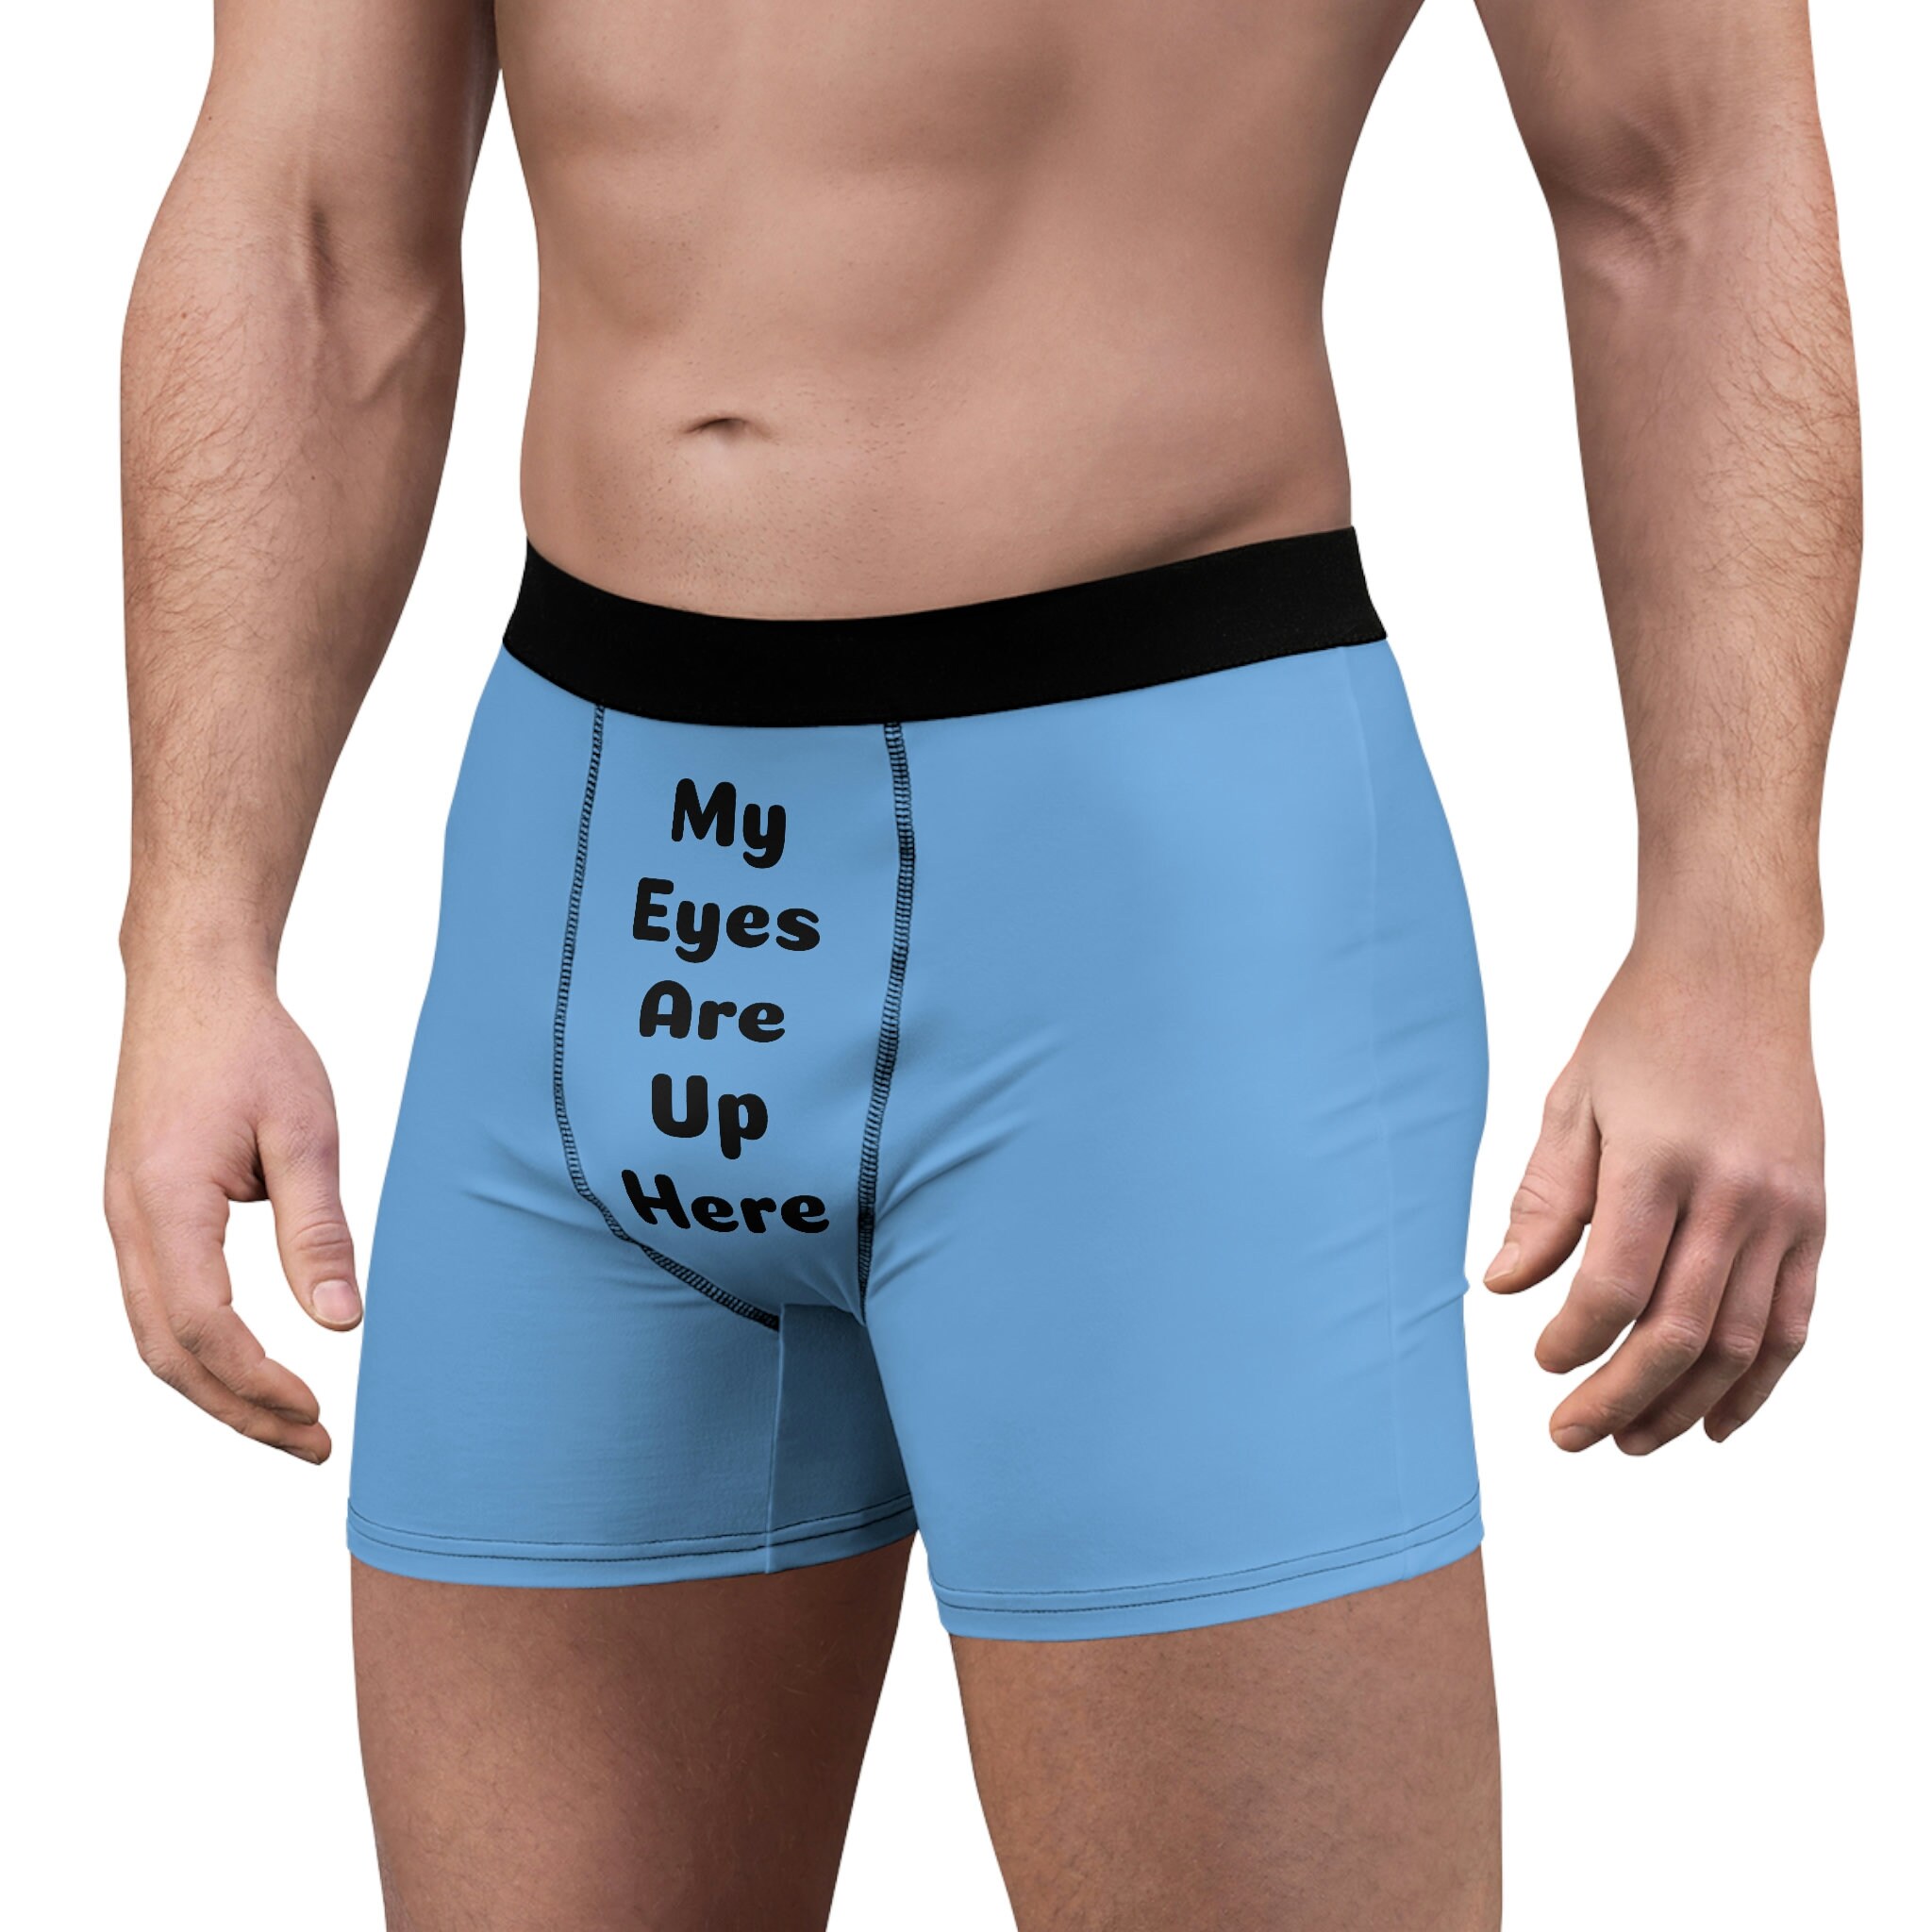 My Eyes Are Up Here Men's Boxer Briefs